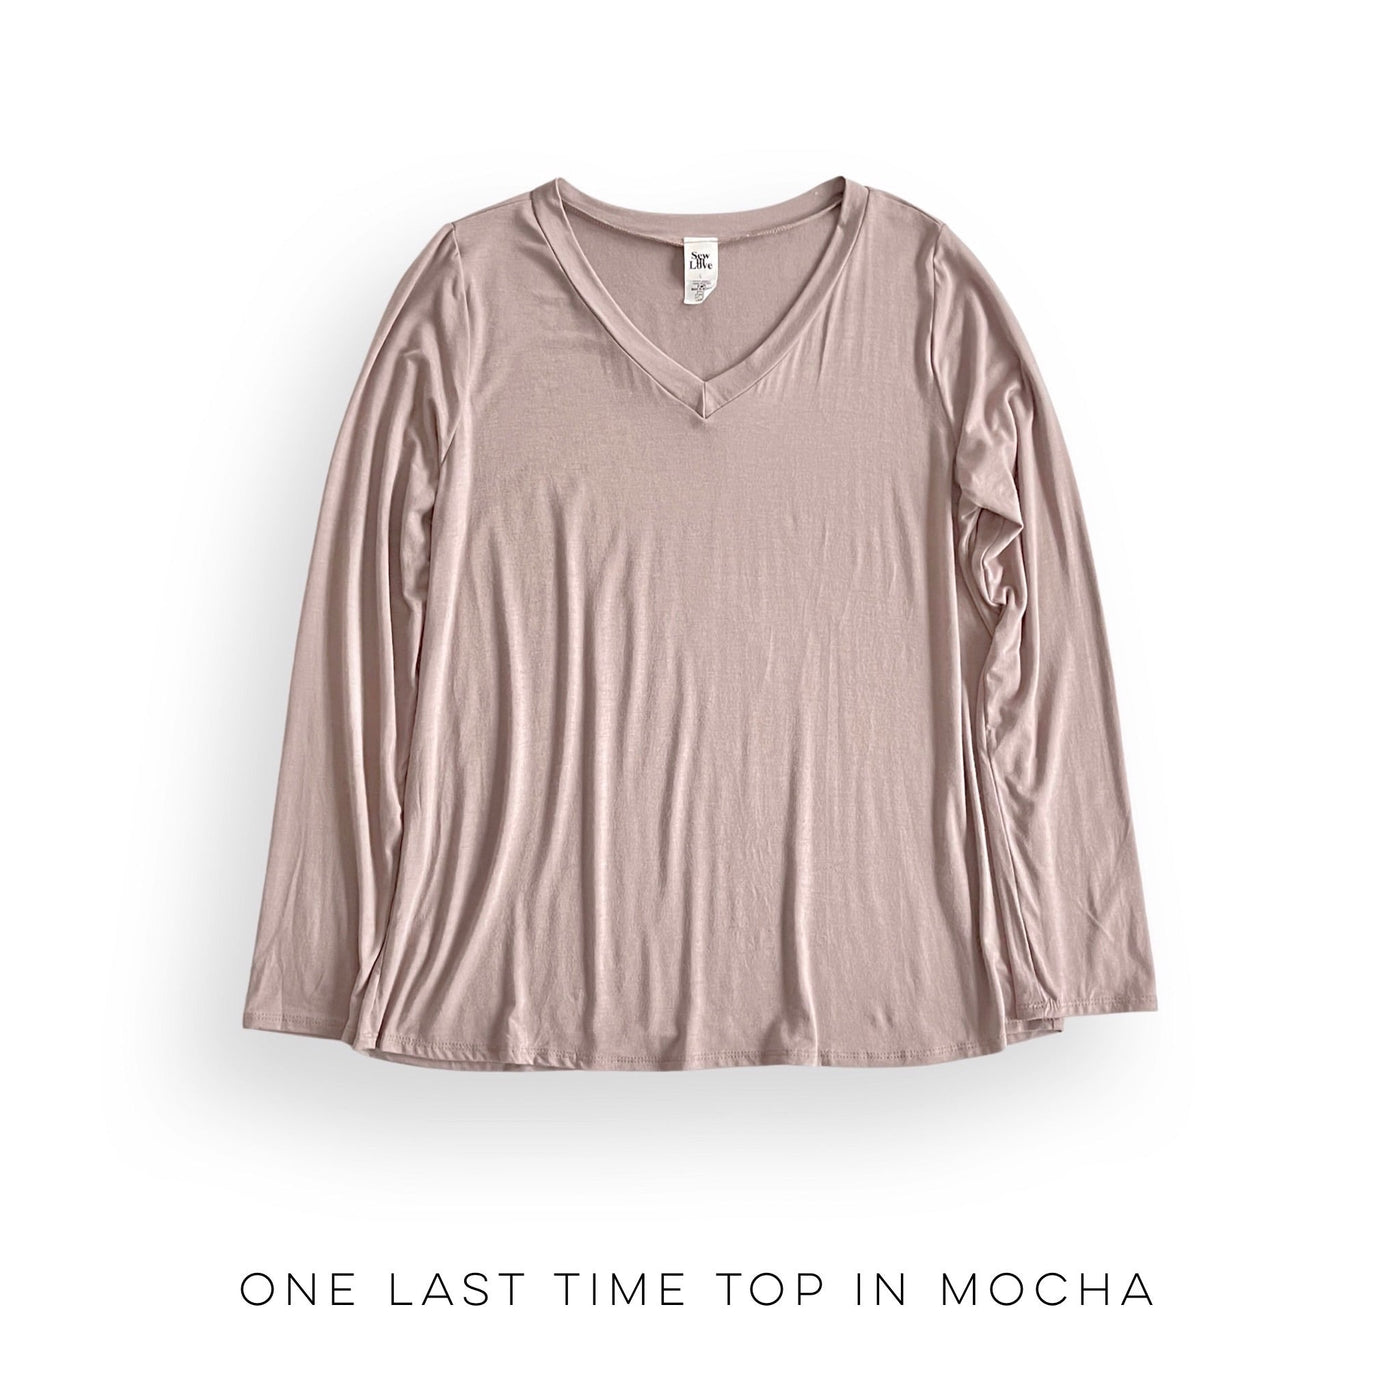 One Last Time Top in Mocha - Copper + Rose